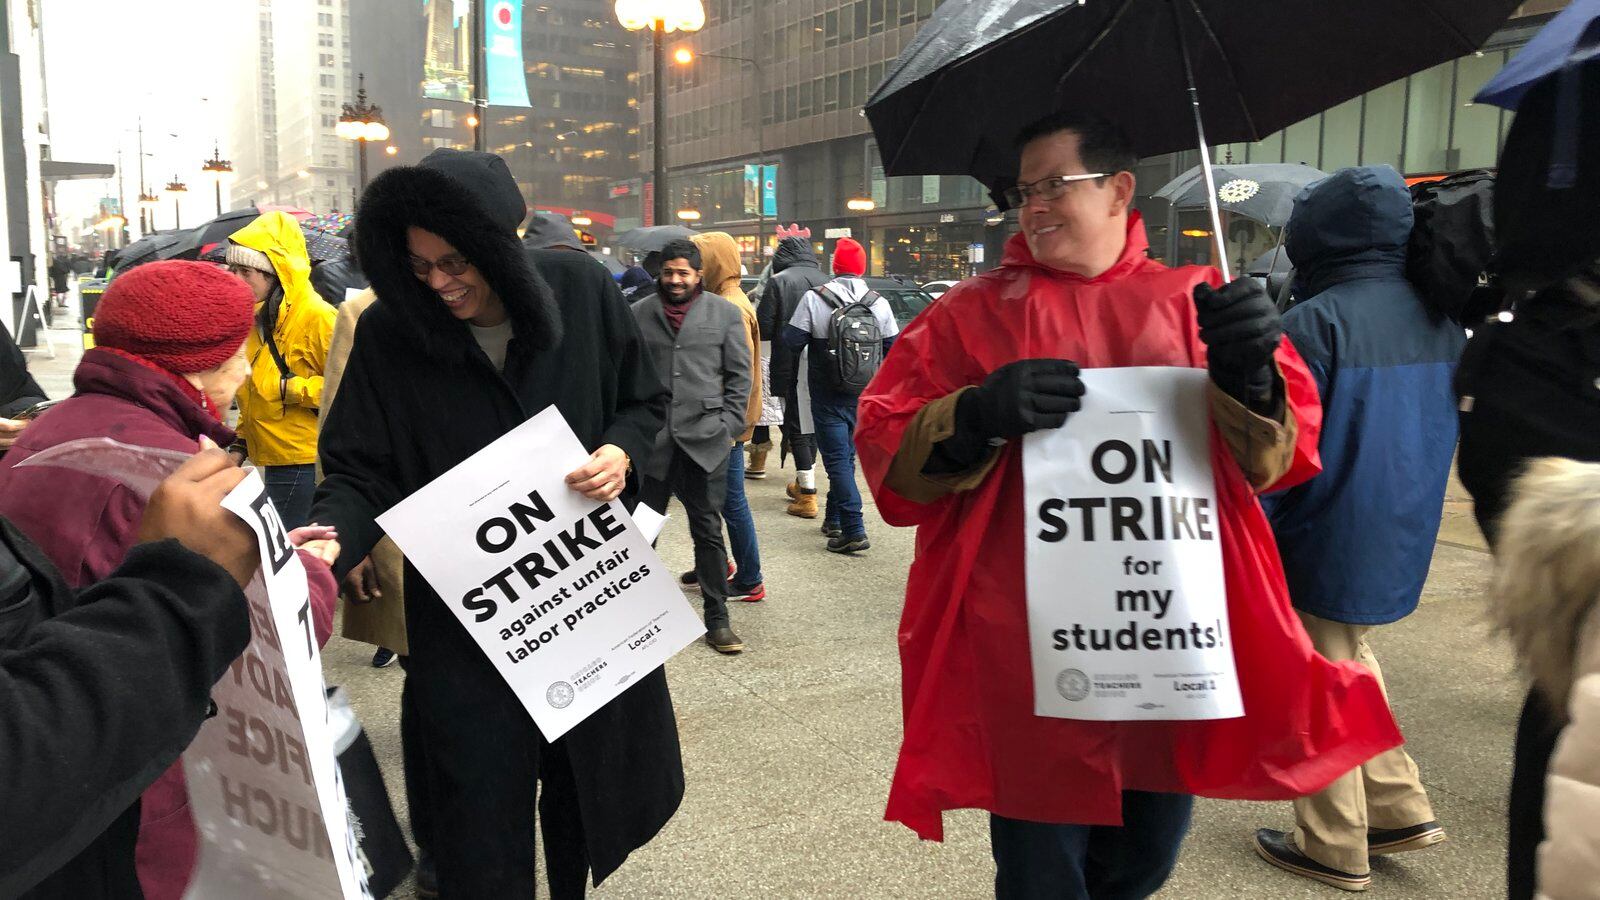 Chicago mayoral candidate Toni Preckwinkle, left, joined striking Chicago International Charter Schools teachers on a picket line at the Illinois Network of Charter Schools on Thursday, Feb. 7, 2019.